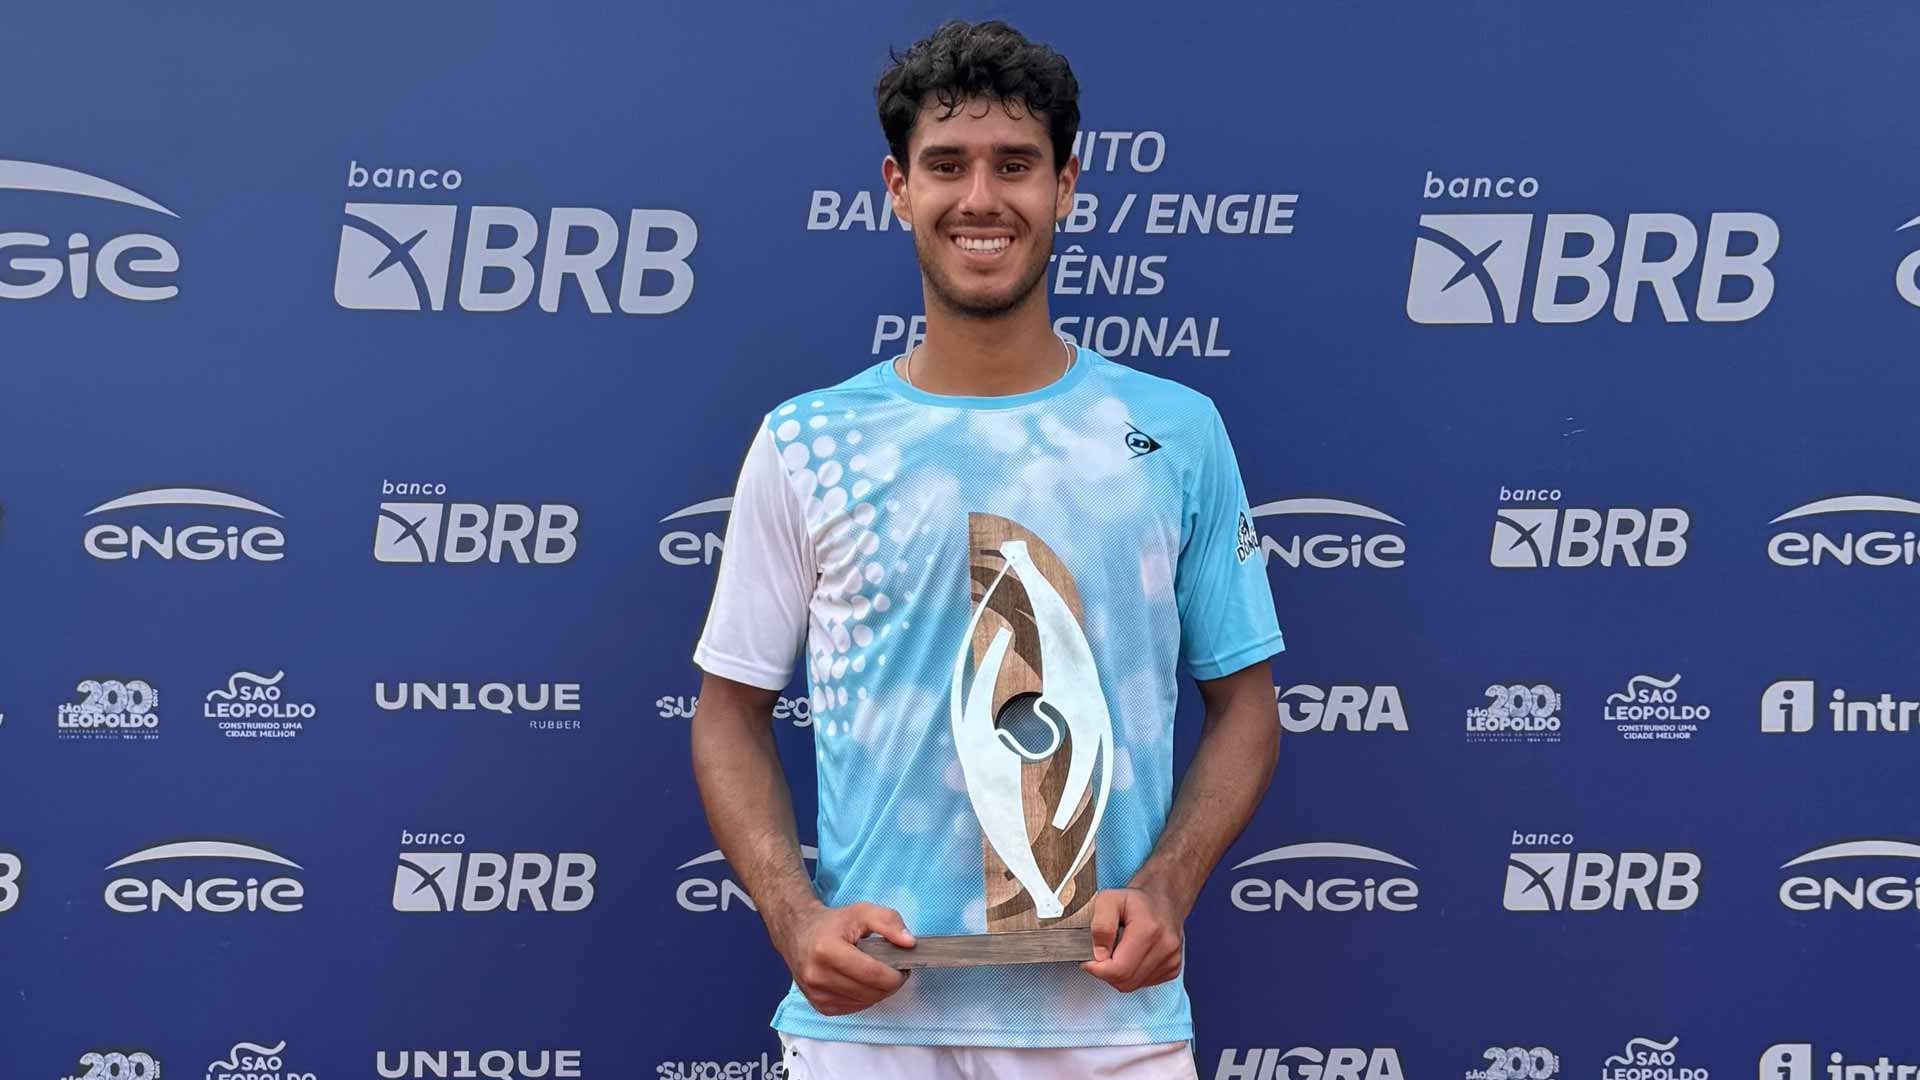 <a href='https://www.atptour.com/en/players/adolfo-daniel-vallejo/v0dp/overview'>Adolfo Daniel Vallejo</a> is crowned champion at the Sao Leopoldo Challenger.